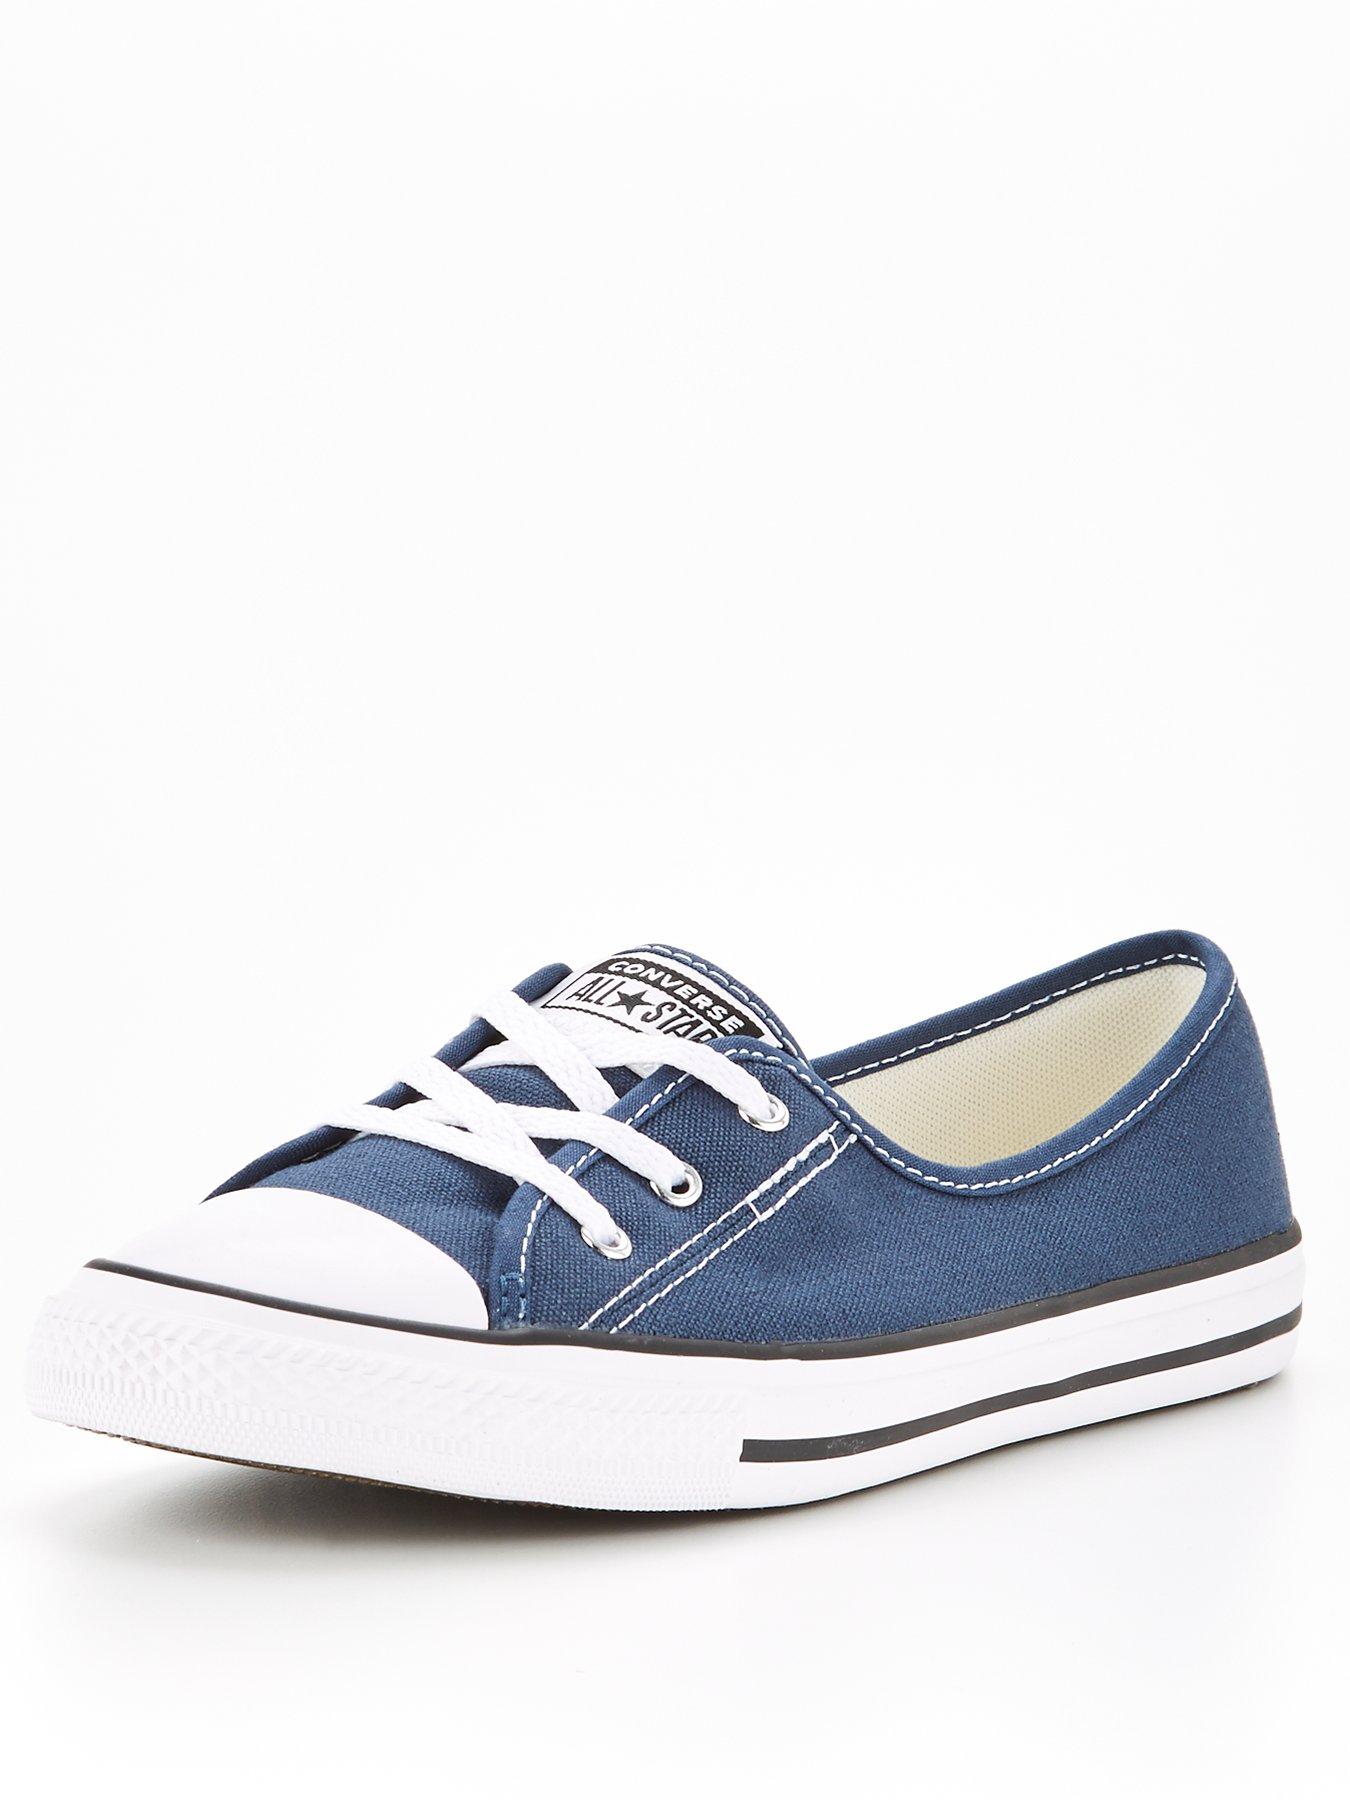 Parat udtale thespian Converse Chuck Taylor All Star Ballet Lace Pump - Navy | very.co.uk